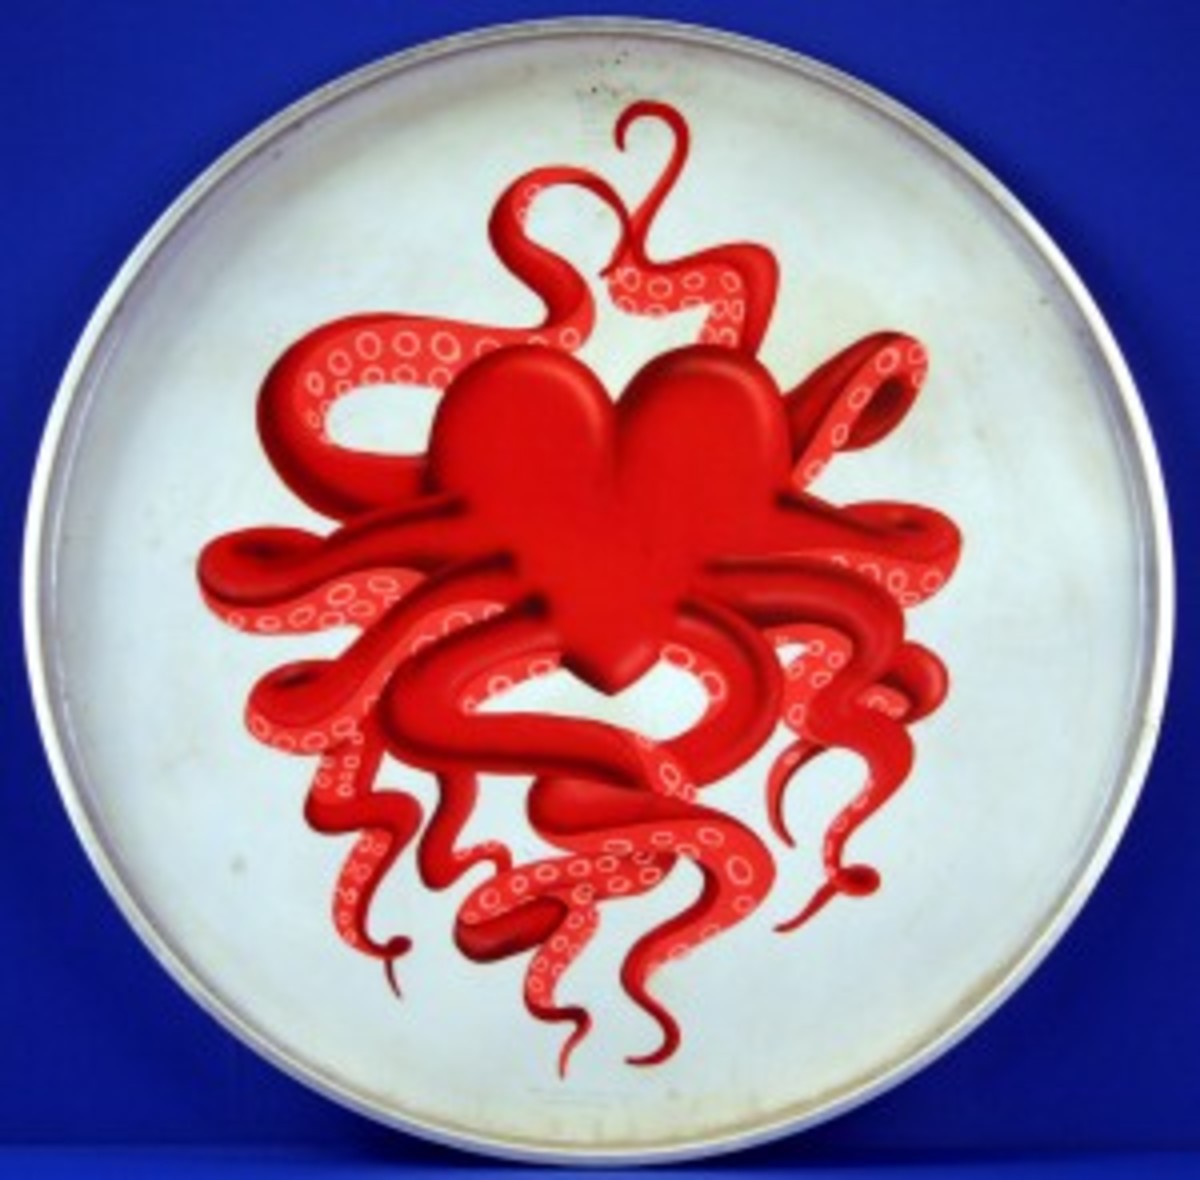 The design adorning this bass drum from percussionist Johny Barbata’s collection was painted by the same artist who created the artwork for Jefferson Starship’s 1975 “Red Octopus” album. 